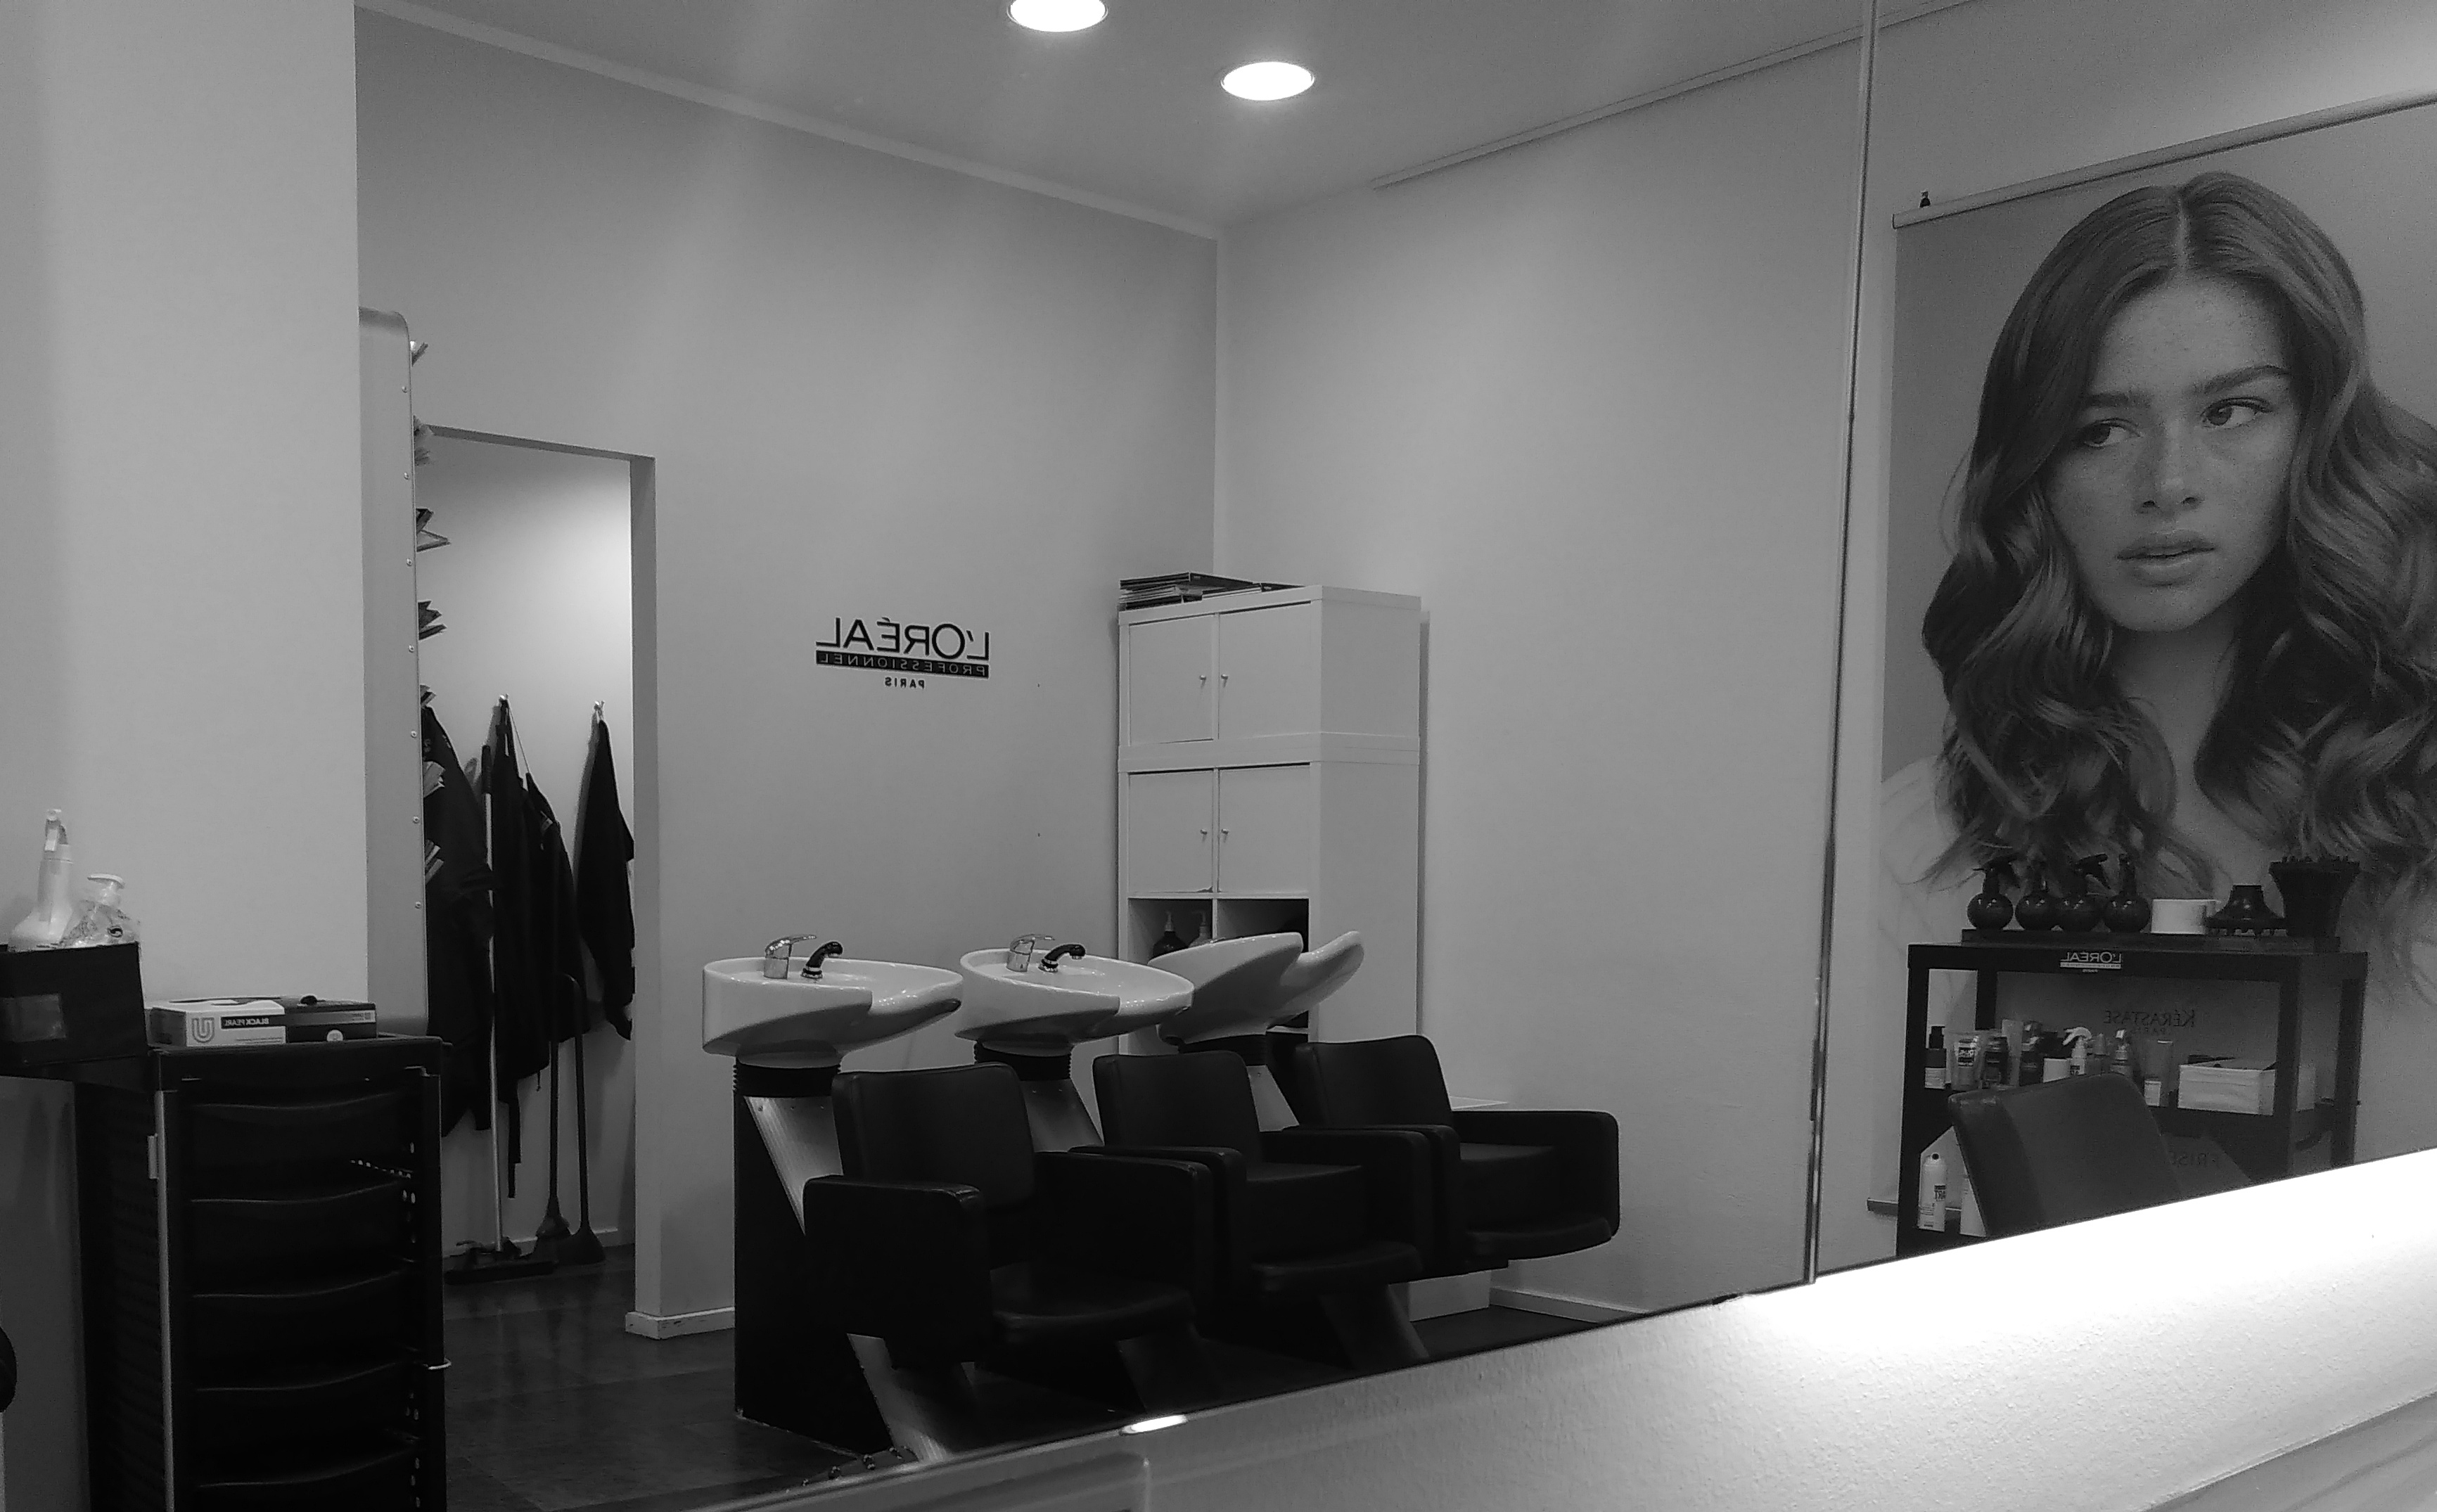 a black and white image of a hairdressing salon. There are two sinks in the back right hand corner and a poster on the wall which shows a headshot of a long haired woman. There is a doorway with some aprons hanging up.